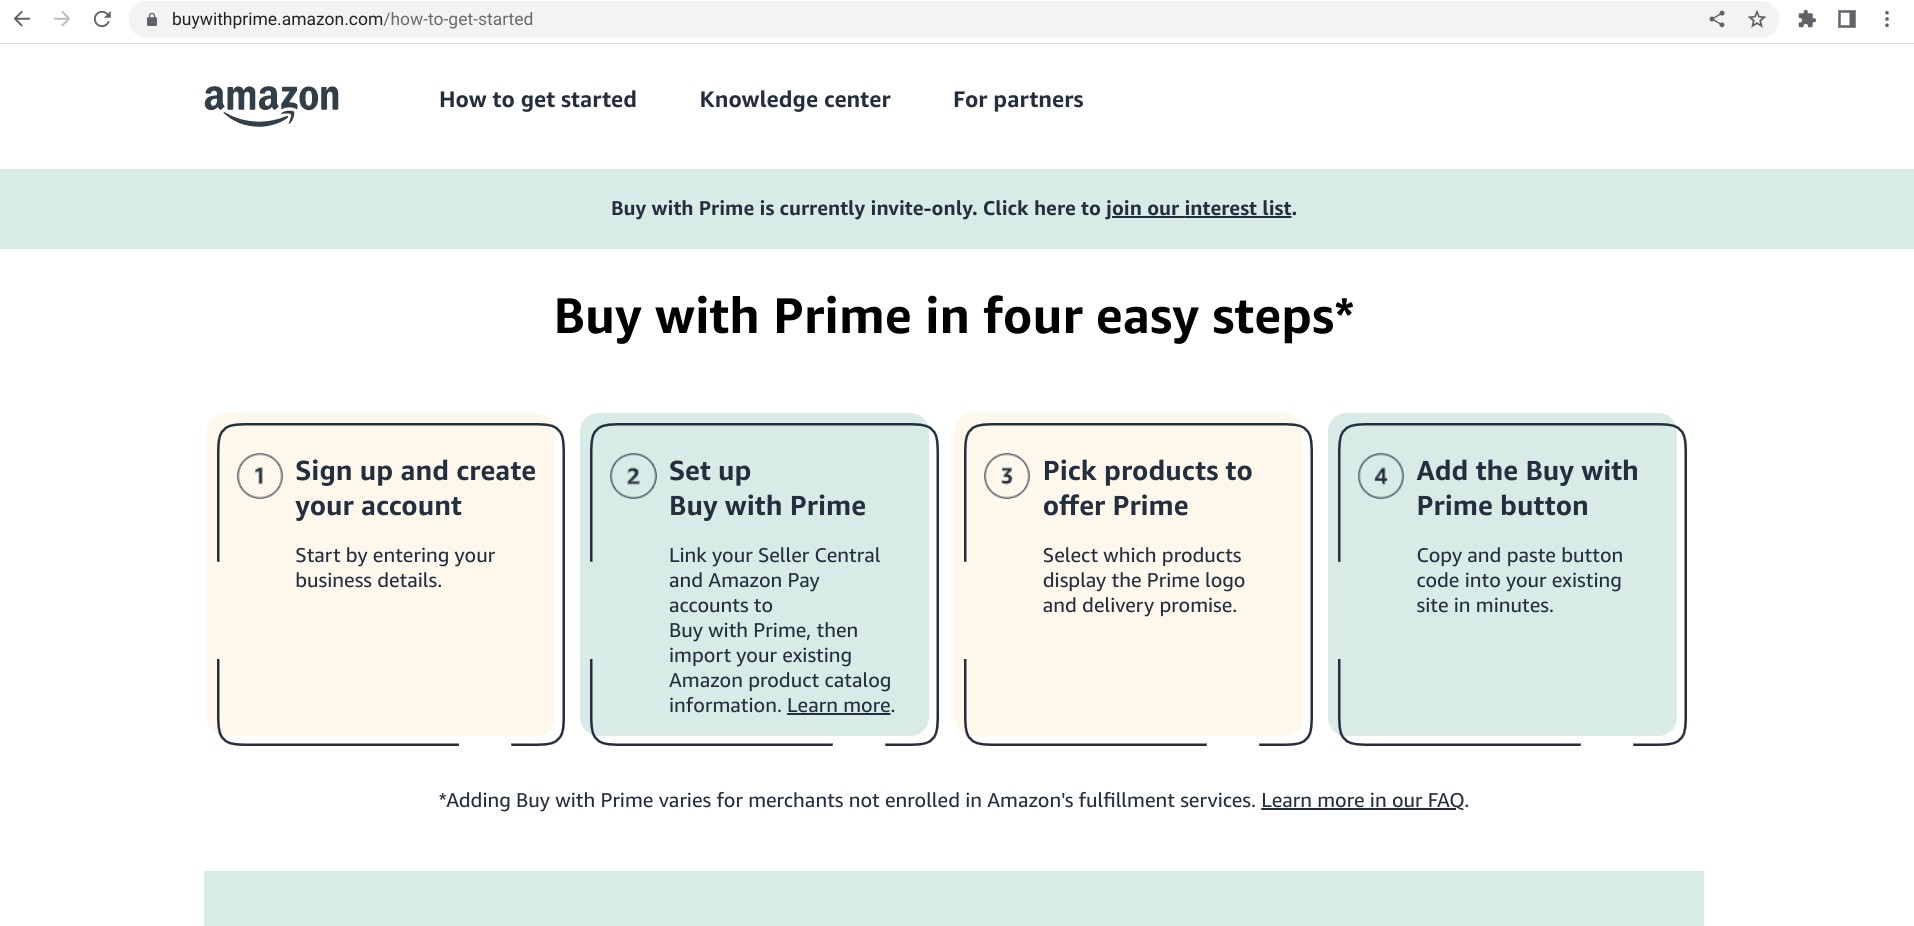 Screenshot of buywithprime.amazon.com depicting the onboarding process